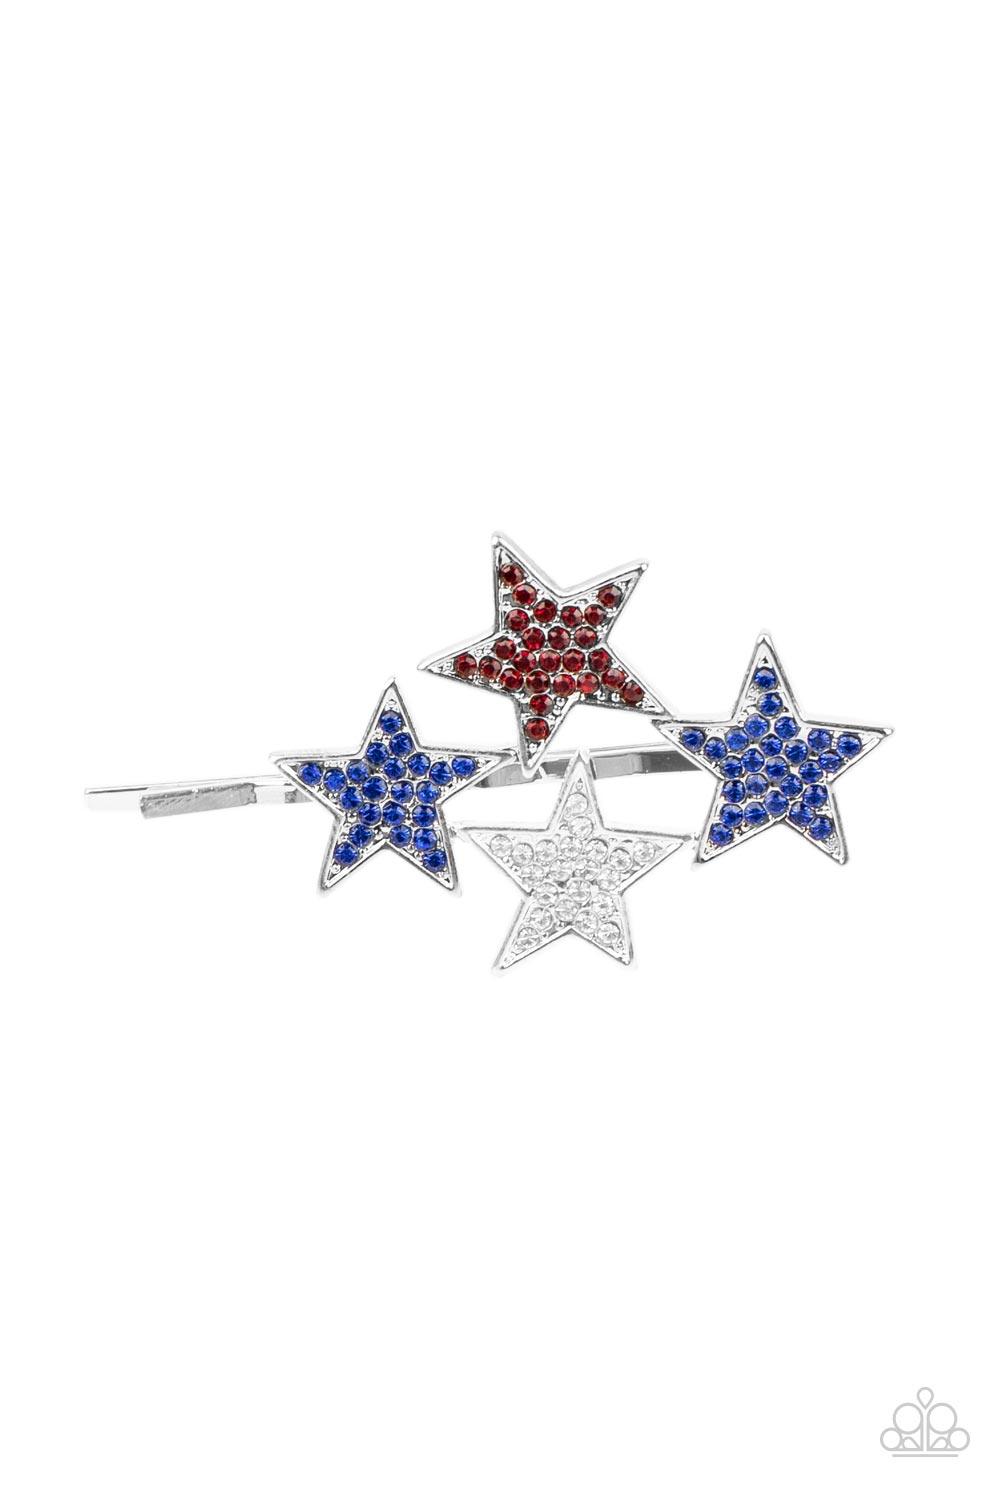 Paparazzi Accessories Stellar Celebration - Blue Dotted in red, white, and blue rhinestones, an explosion of stars adorns the front of a silver bobby pin for a stellar patriotic shimmer. Sold as one individual hair clip. Jewelry